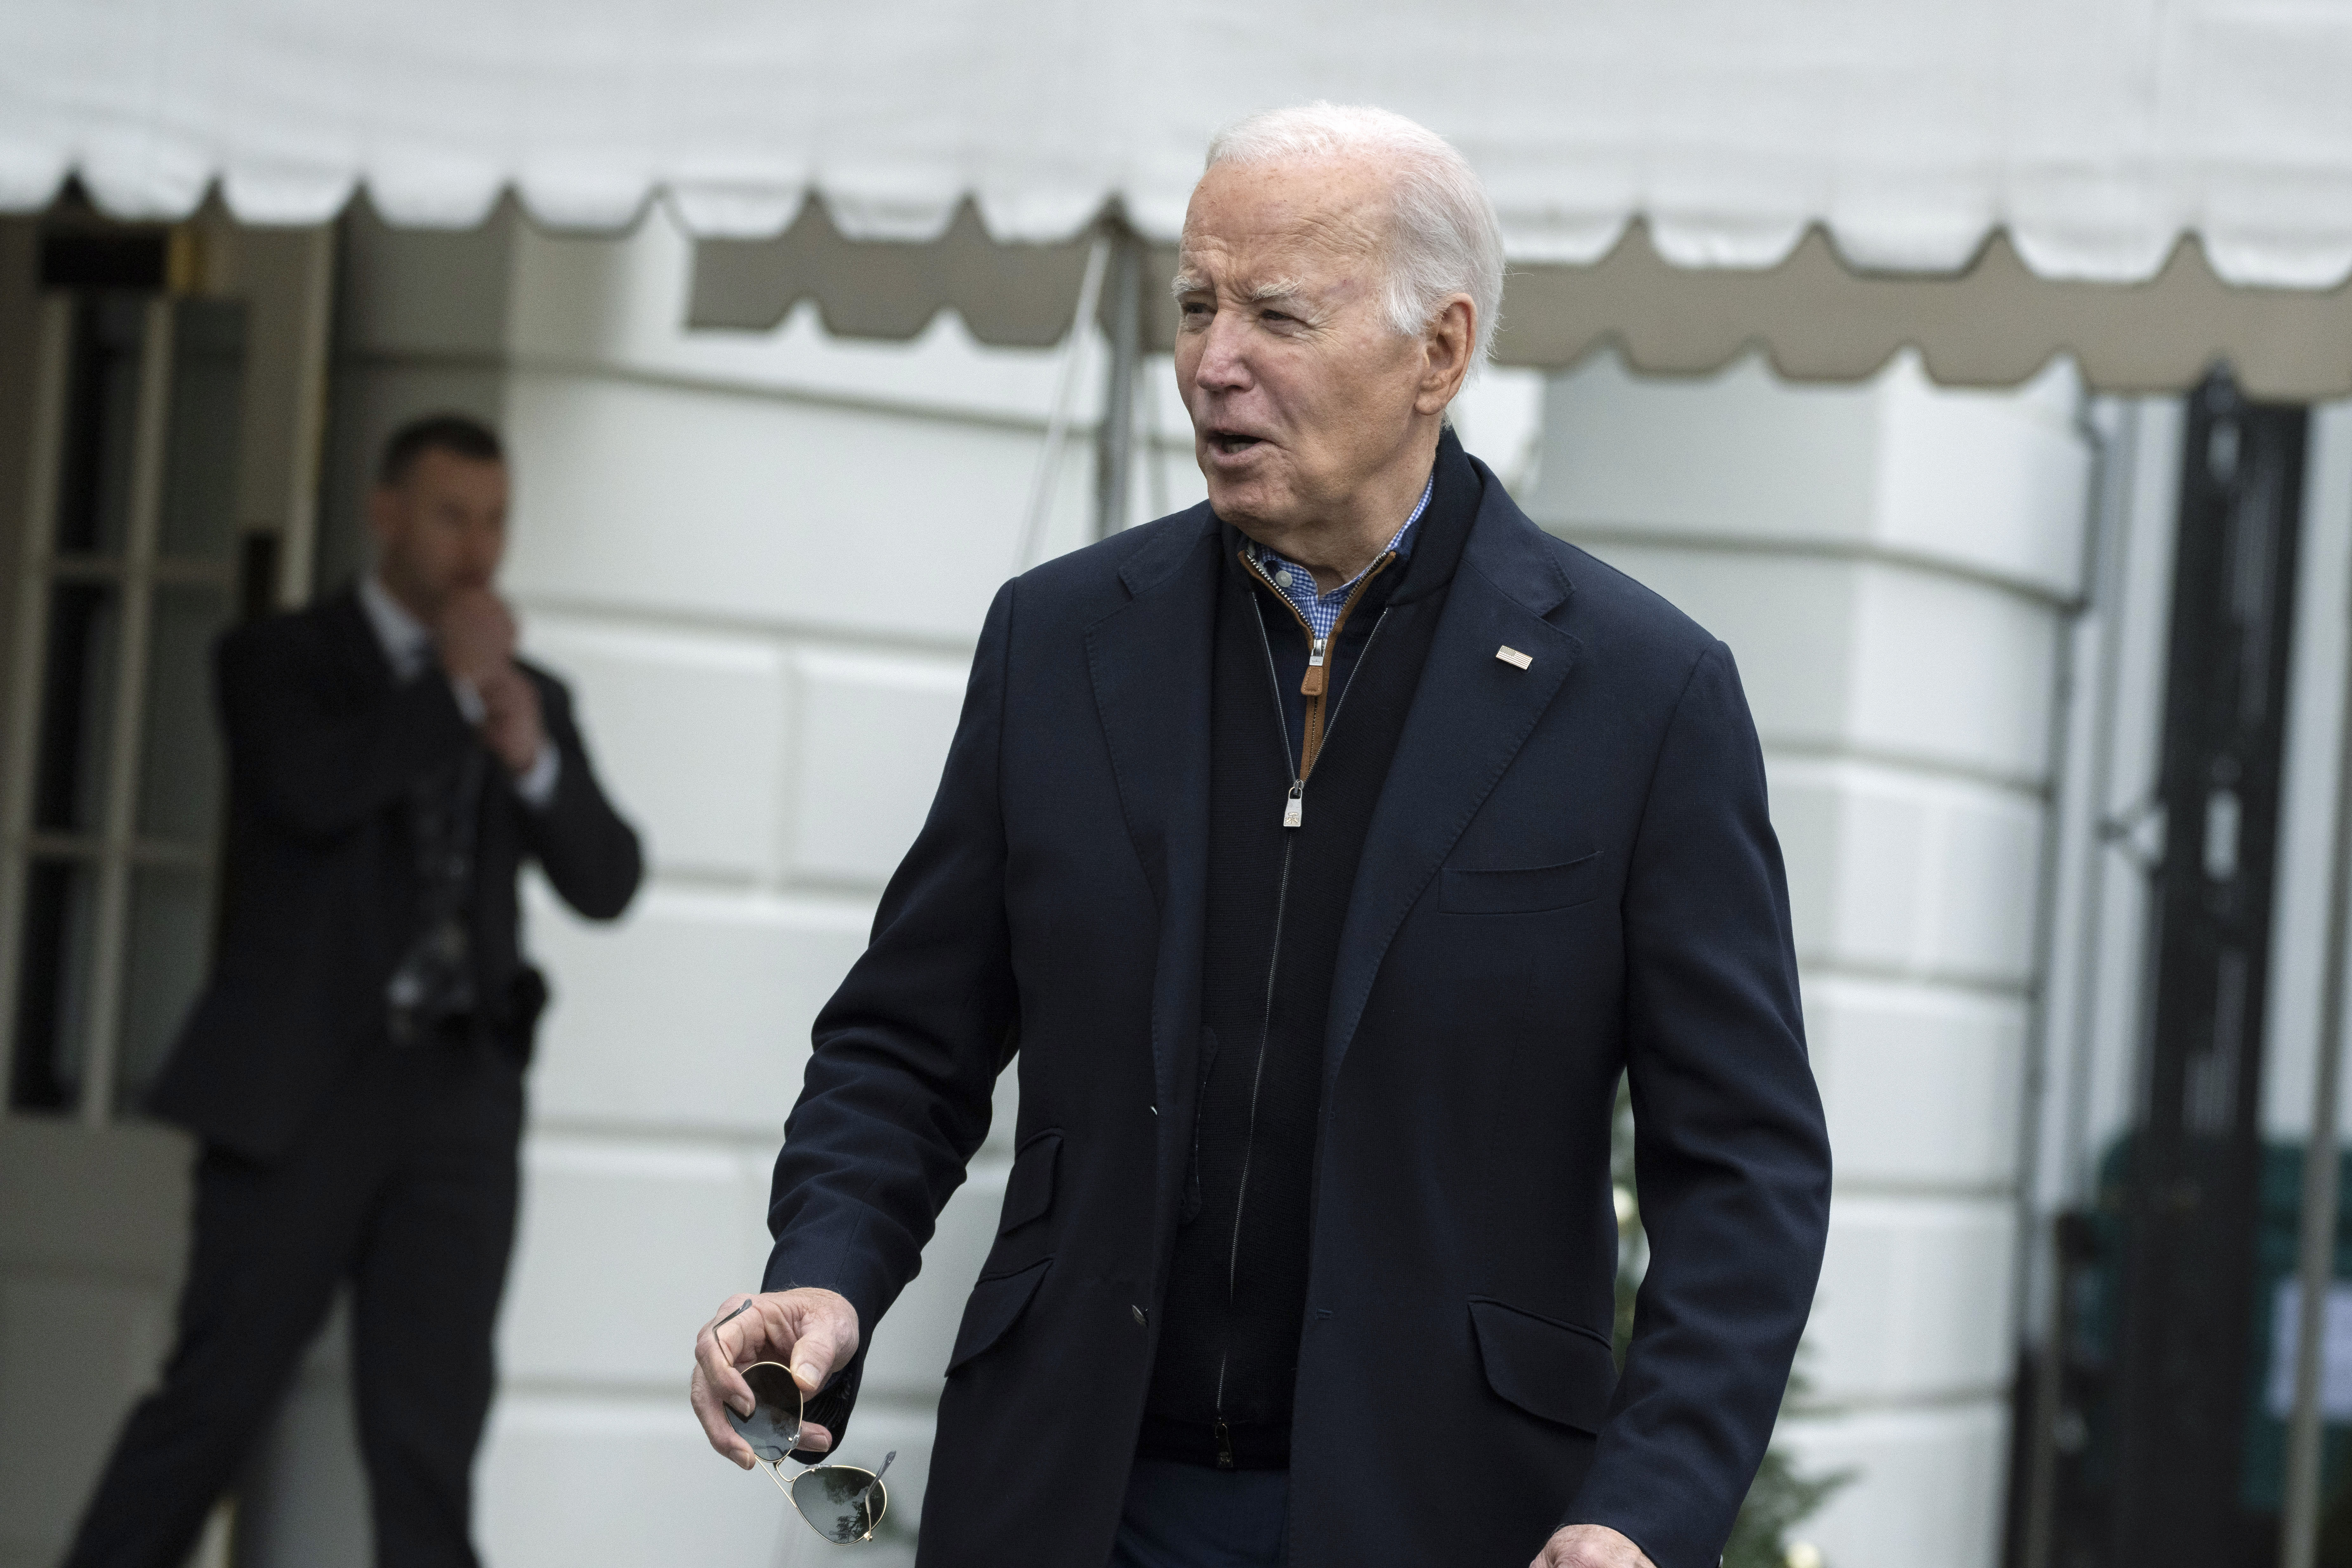 Biden administration poised to weaken weed restrictions, a seismic shift from decades of harsh policies